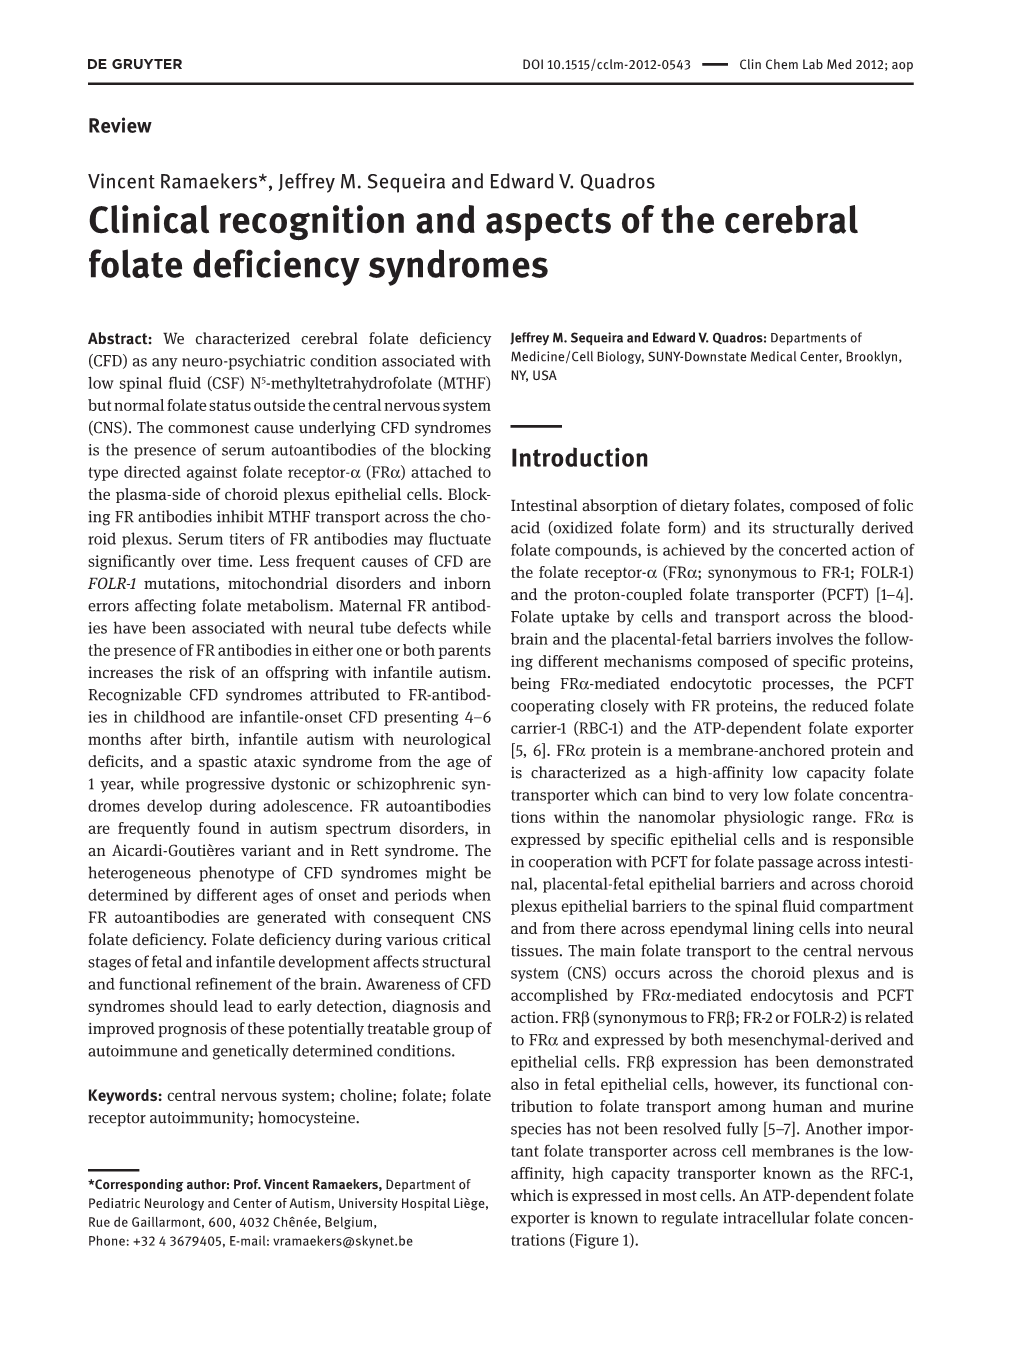 Clinical Recognition and Aspects of the Cerebral Folate Deficiency Syndromes